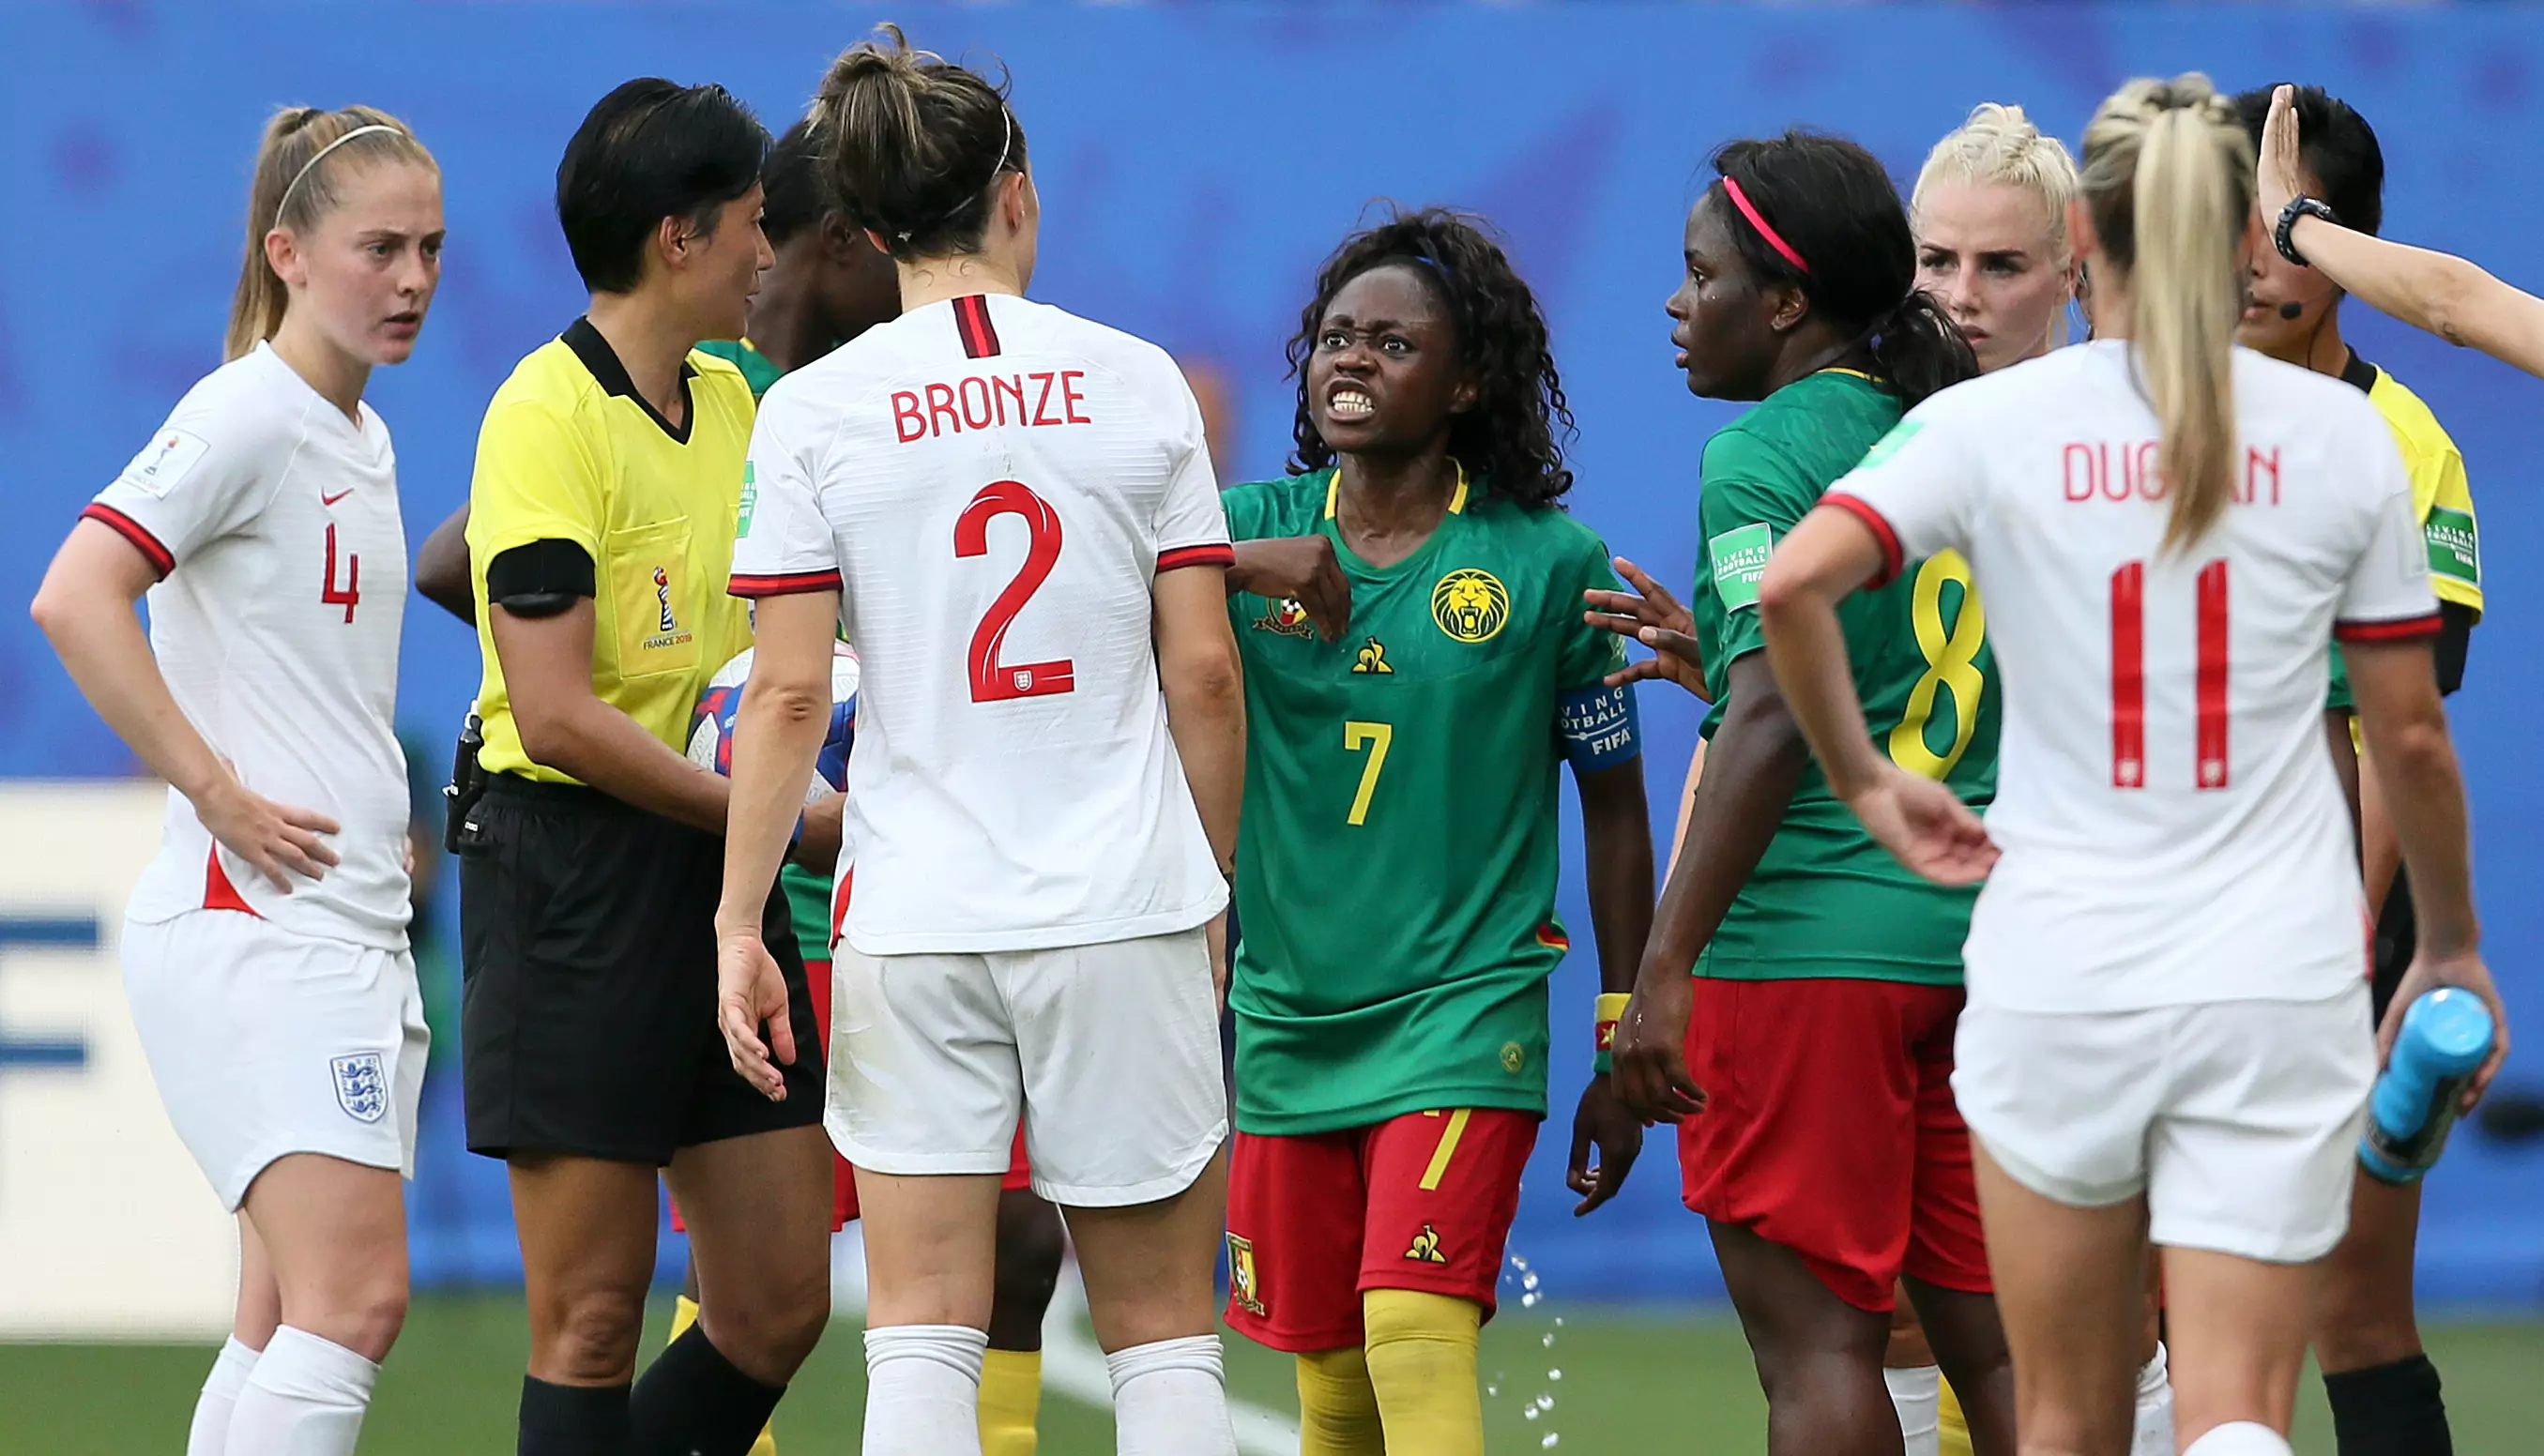 Things got feisty against Cameroon at the Women's World Cup 2019